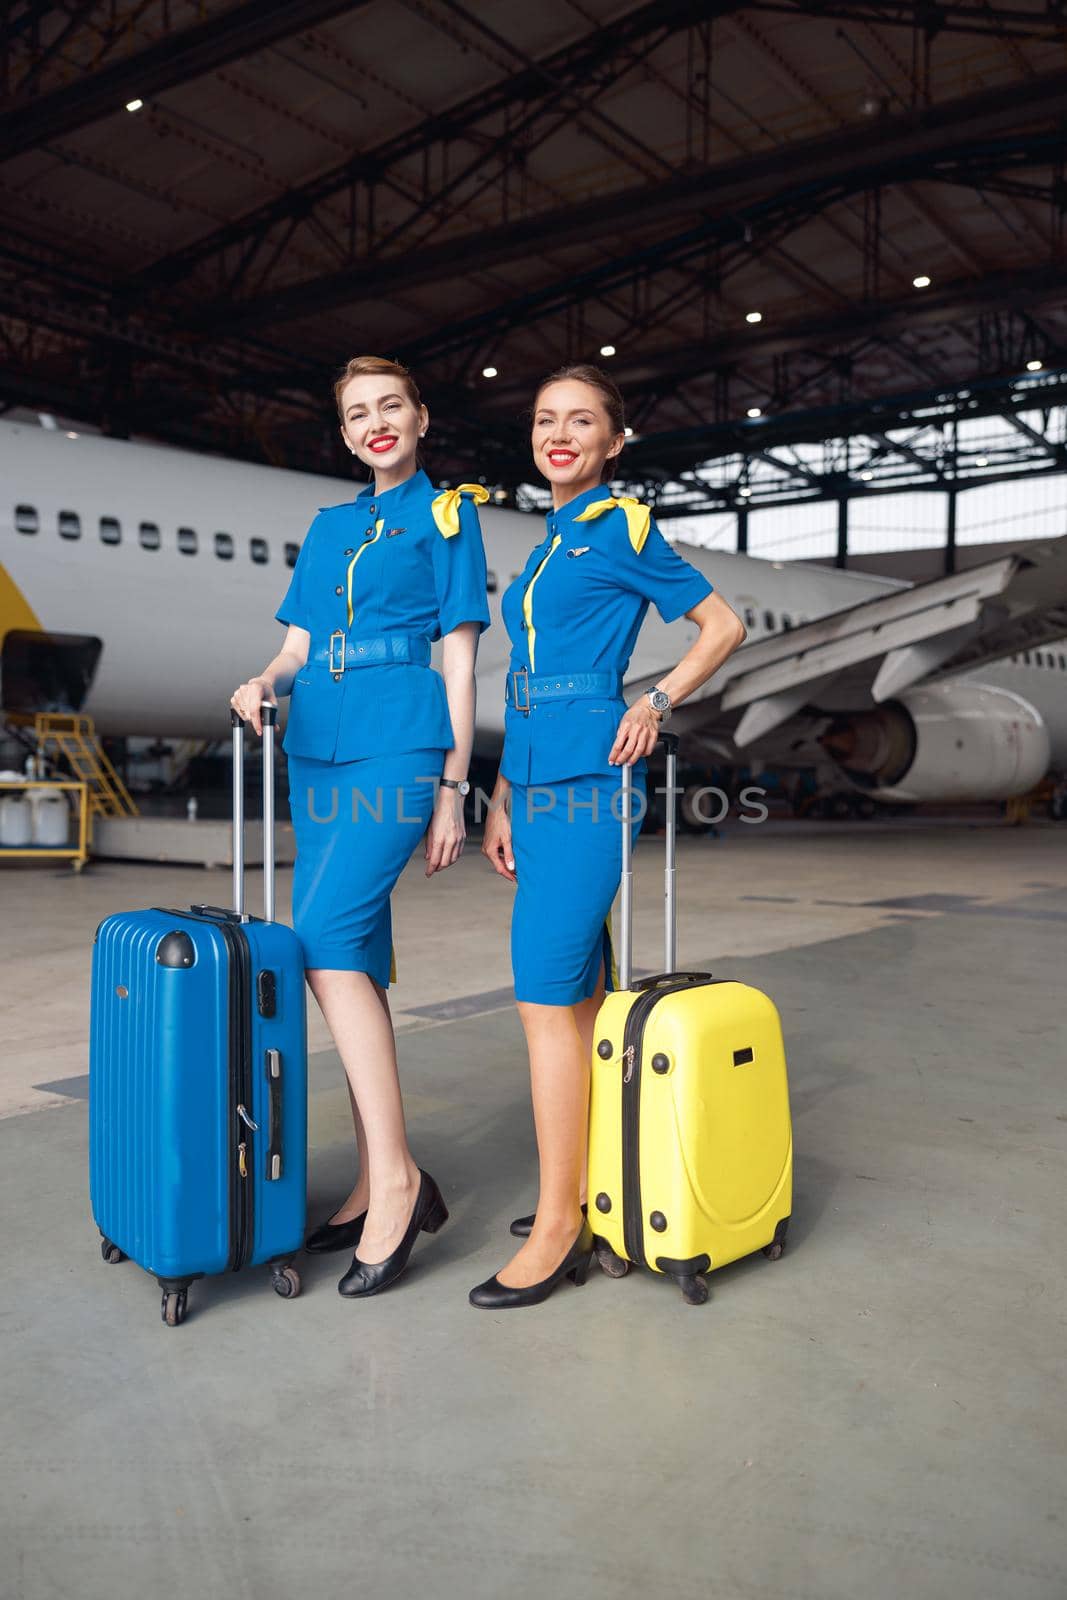 Full length shot of two smiling air stewardesses in bright blue uniform ready for flight, standing with their luggage in front of passenger aircraft in hangar at the airport. Occupation concept